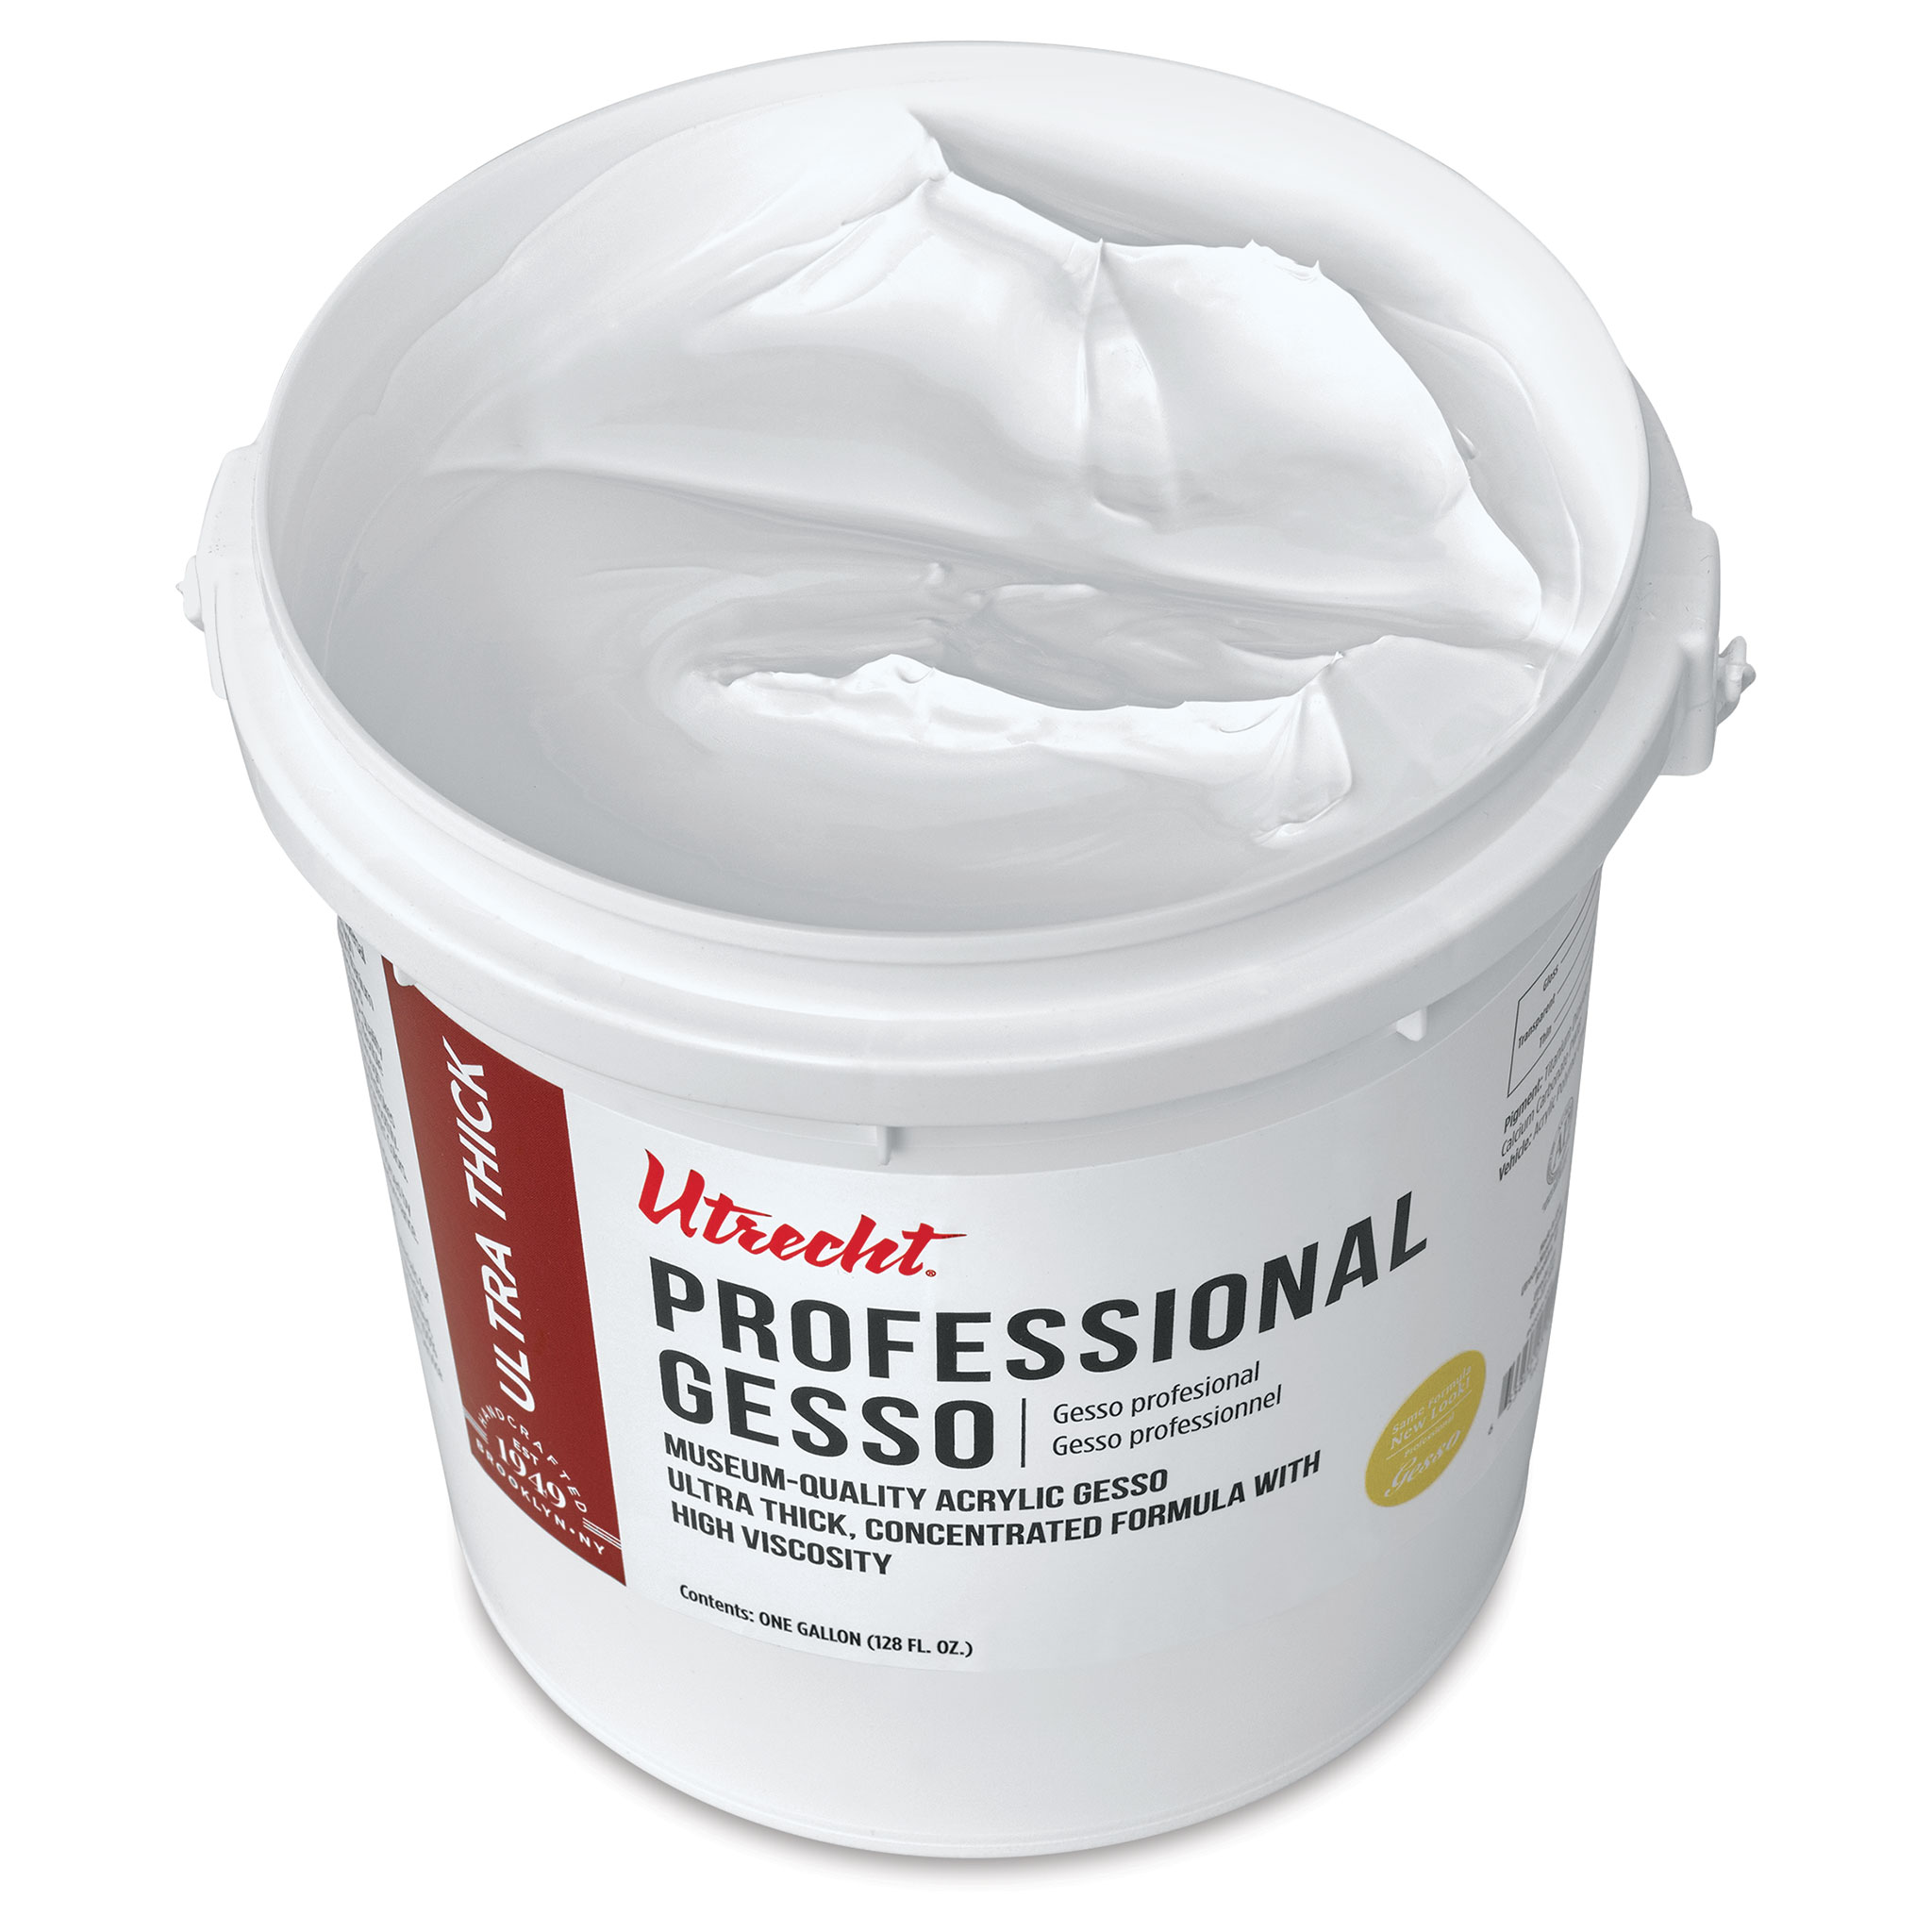 Hyatt's Professional Acrylic Gesso – 1 Gallon / 128 Oz, Made in USA,  Maximum Pigment and Opacity Load, Conforms to ASTM-D 4236 